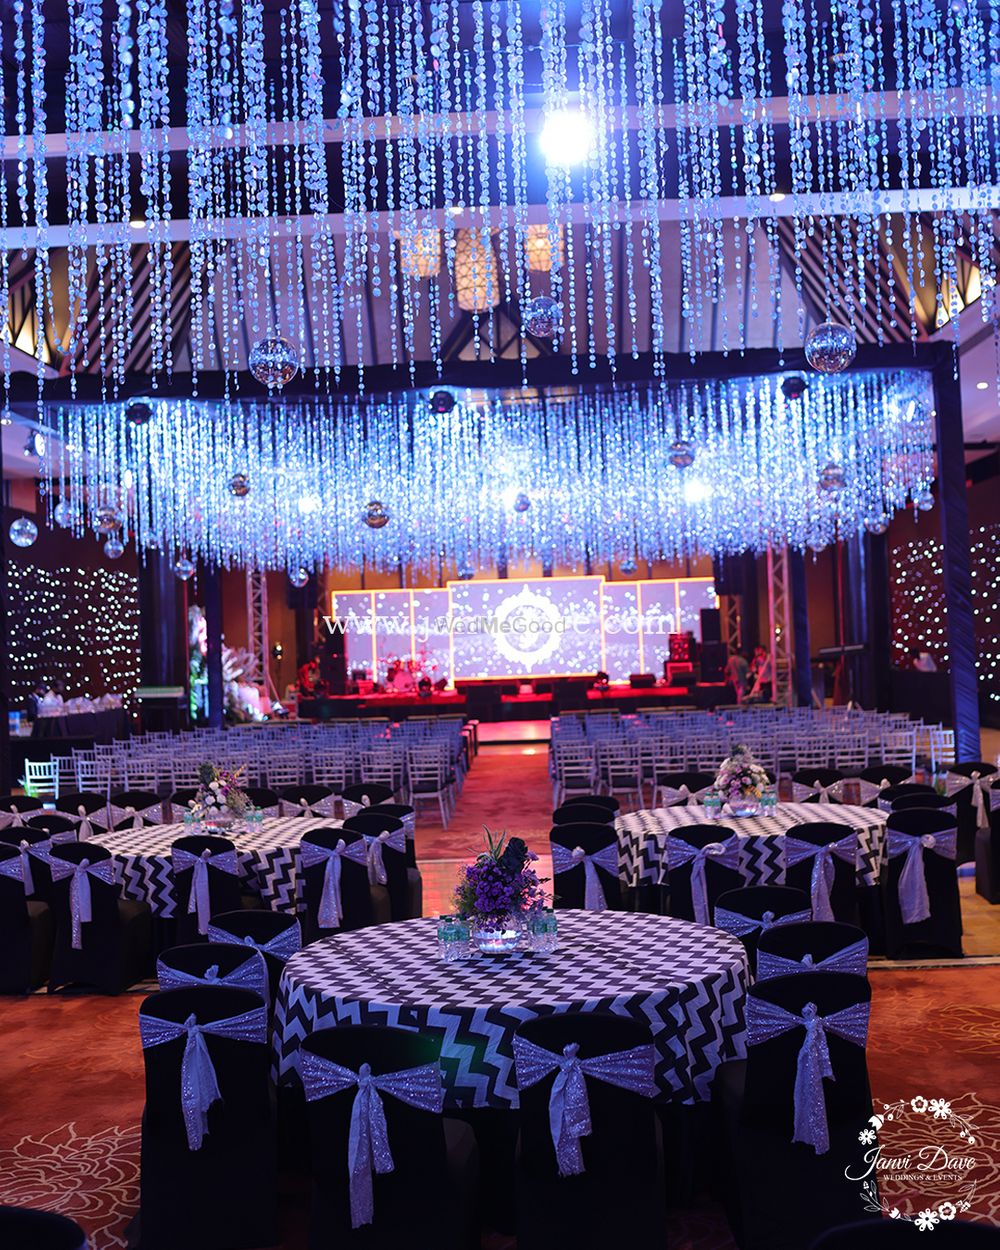 Photo From 'Disco' Themed Sangeet Night - By Janvi Dave - Weddings & Events